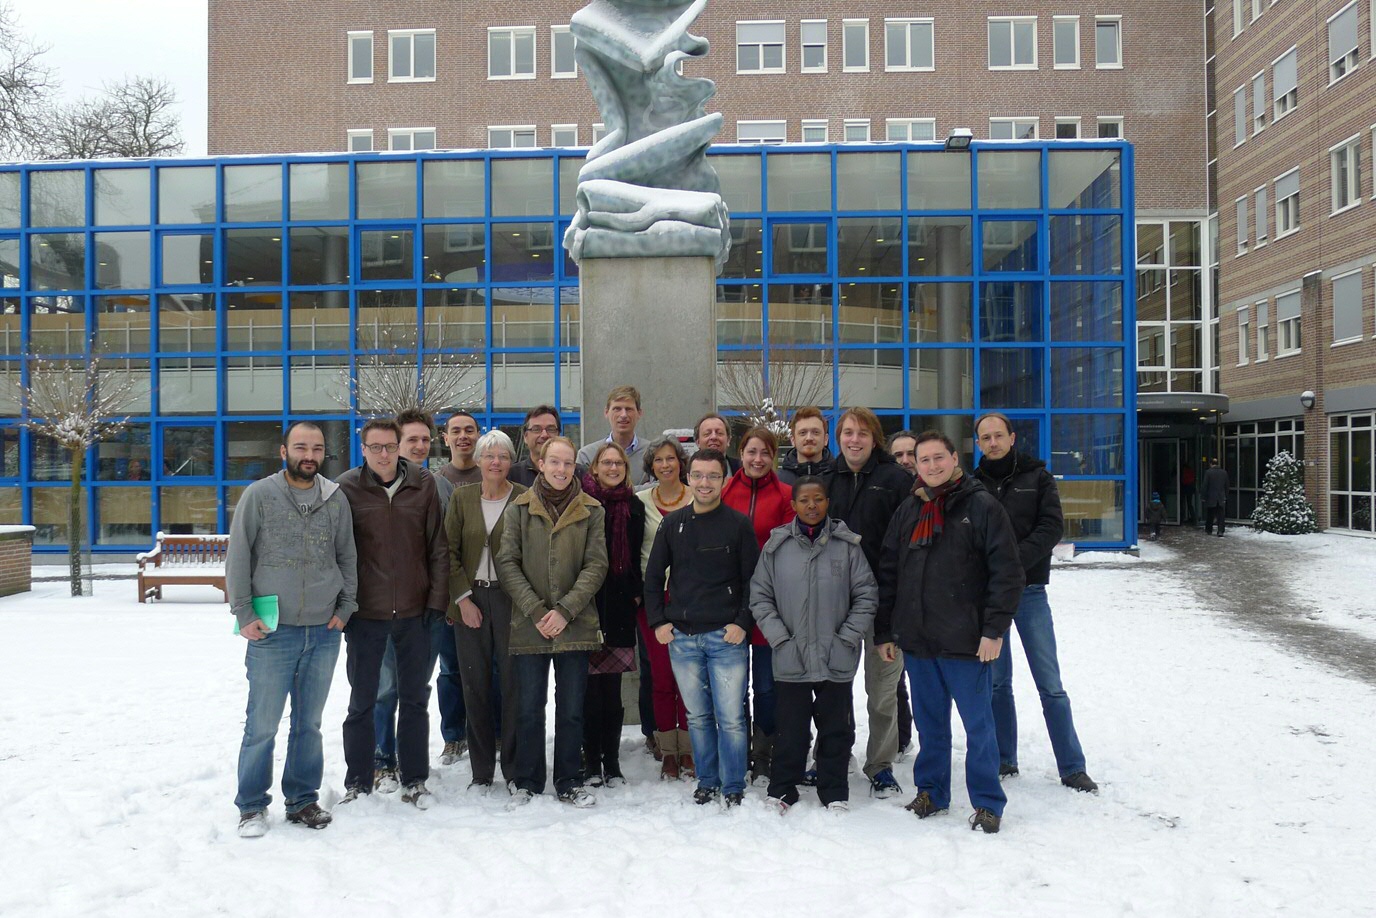 Group picture from 2009. Calculating the union with the 2017 picture is left as an exercise for the reader.